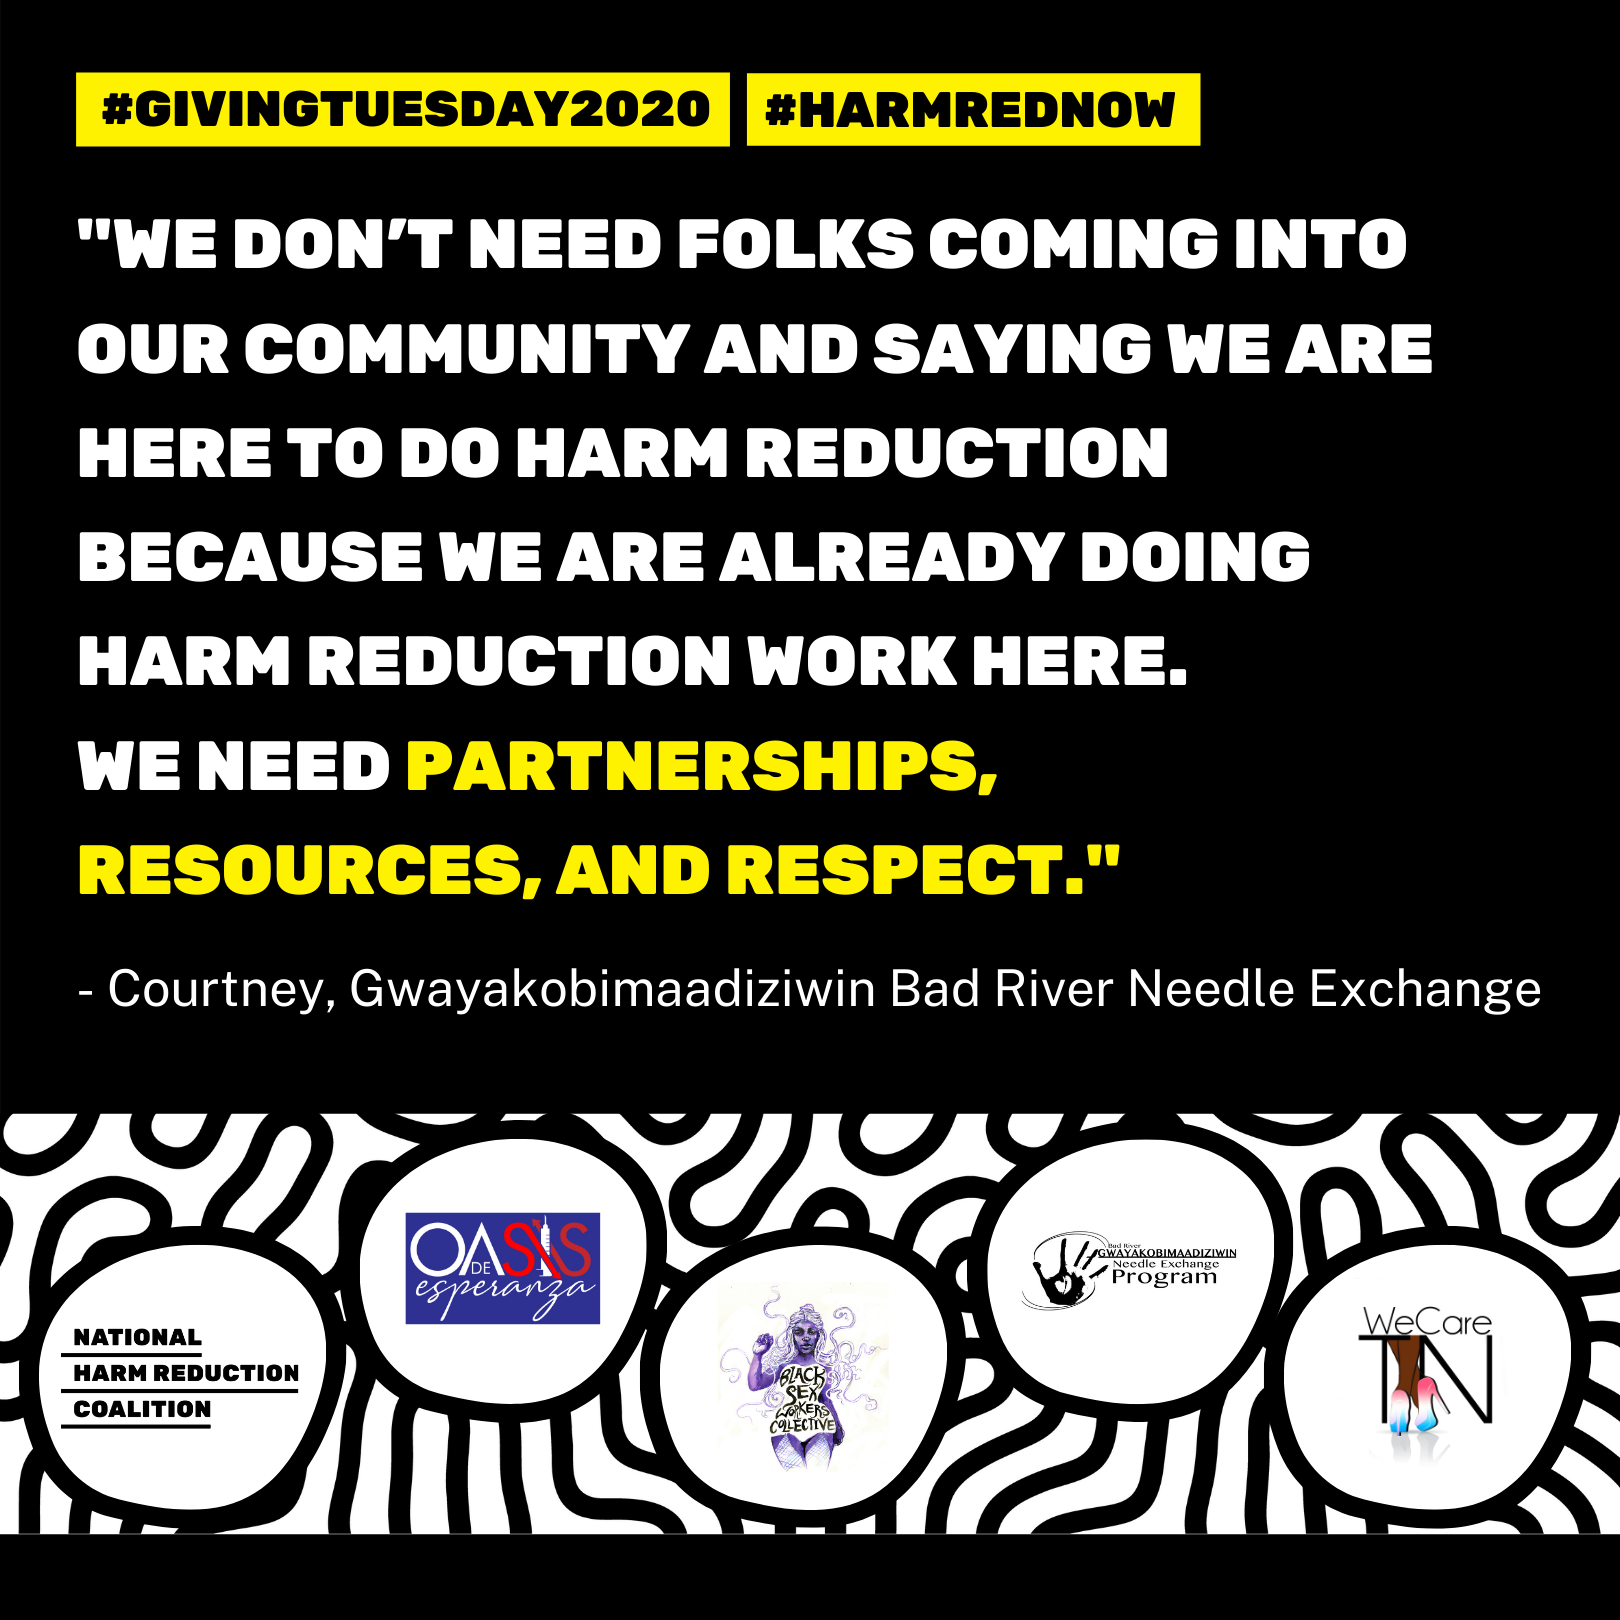 ''''We don''t need folks coming into our community and saying we are here to do harm reduction because we are already doing harm reduction work here. We need partnerships, resources, and respect.'''' -?Courtney, Gwayakobimaadiziwin Bad River Needle Exchange